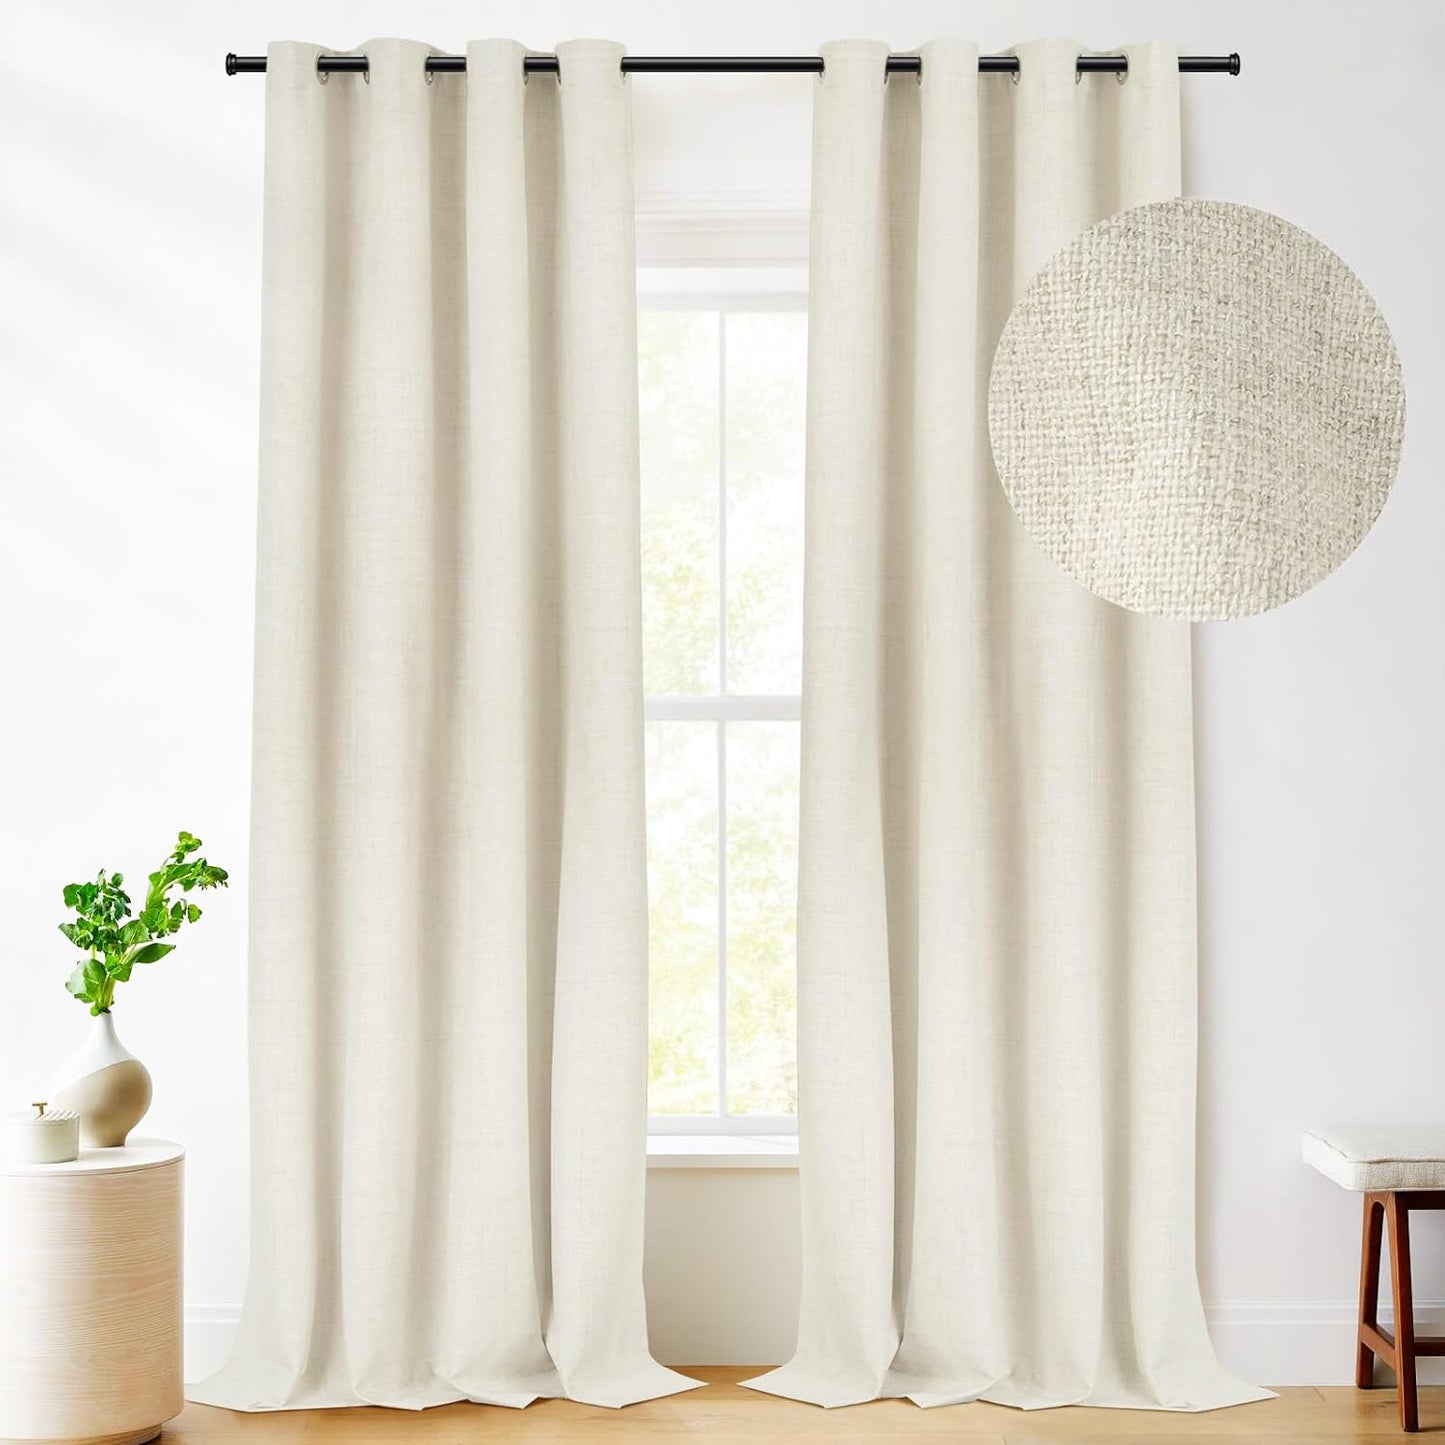 RHF Blackout Curtains 84 Inch Length 2 Panels Set, Primitive Linen Look, 100% Blackout Curtains Linen Black Out Curtains for Bedroom Windows, Burlap Grommet Curtains-(50X84, Oatmeal)  Rose Home Fashion Cream W50 X L96 